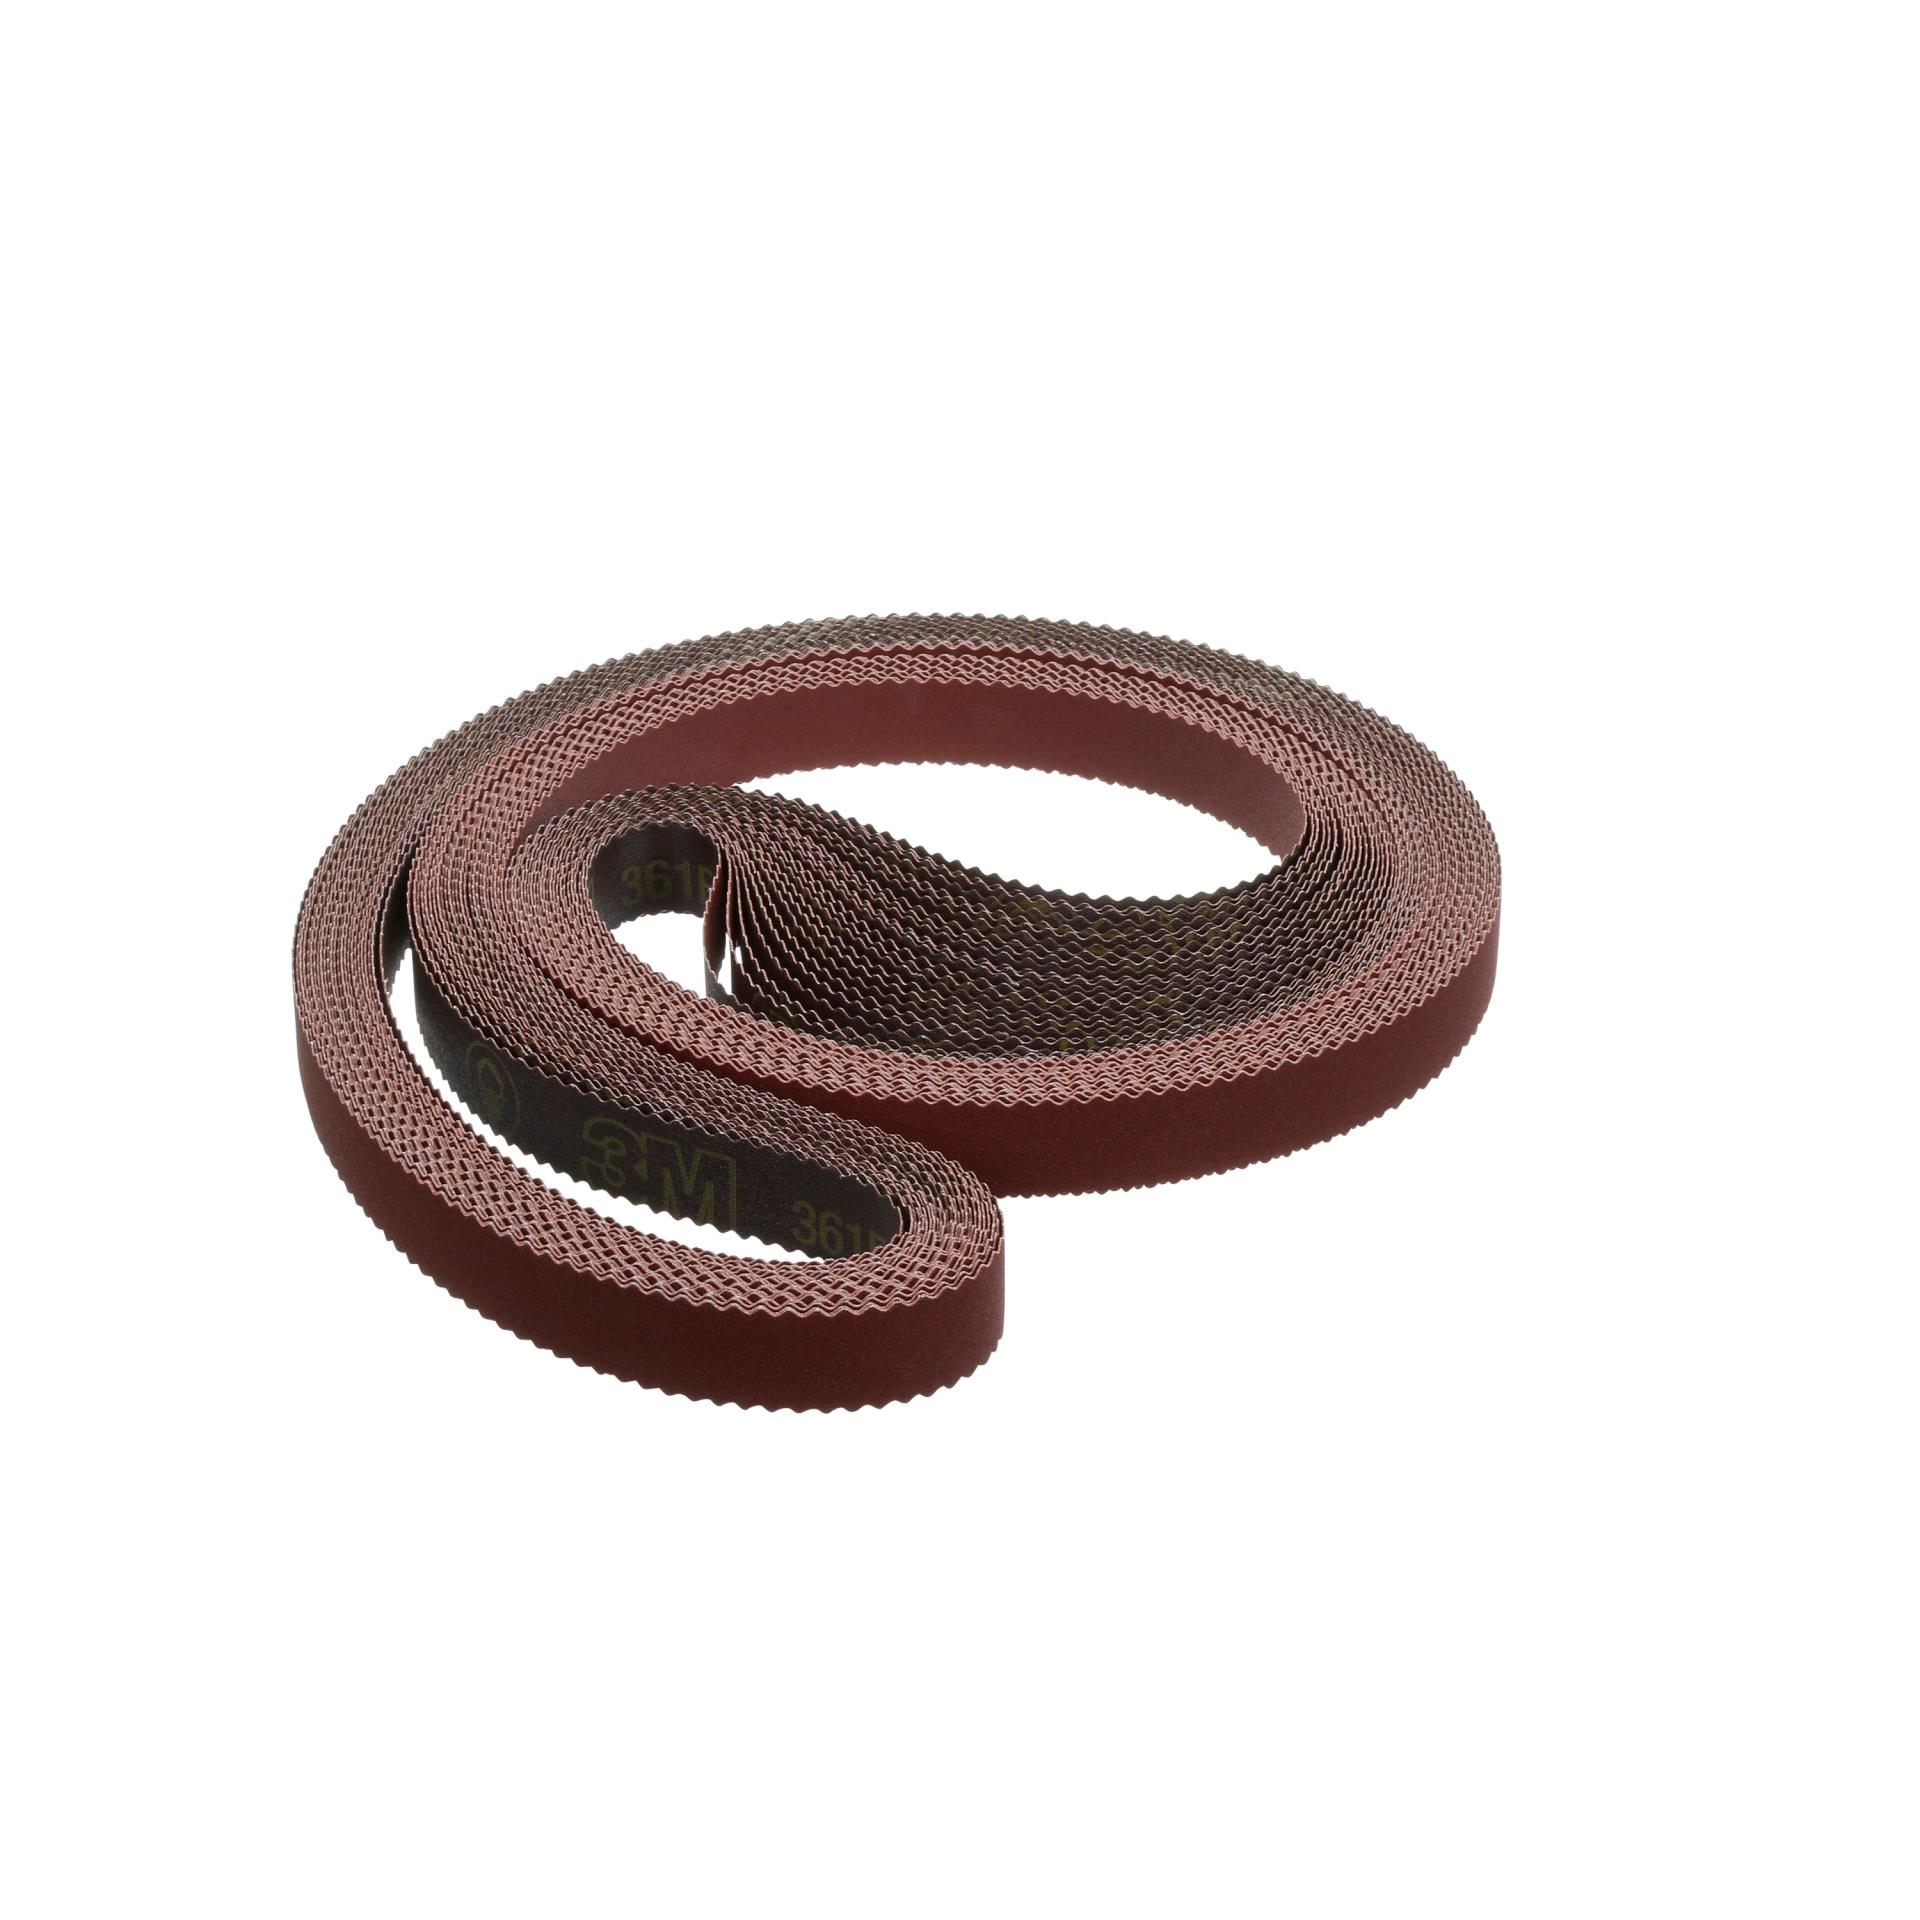 3/4 STANDARD HOSE AND NOZZLE  WASHERS   "100 PER BAG" 